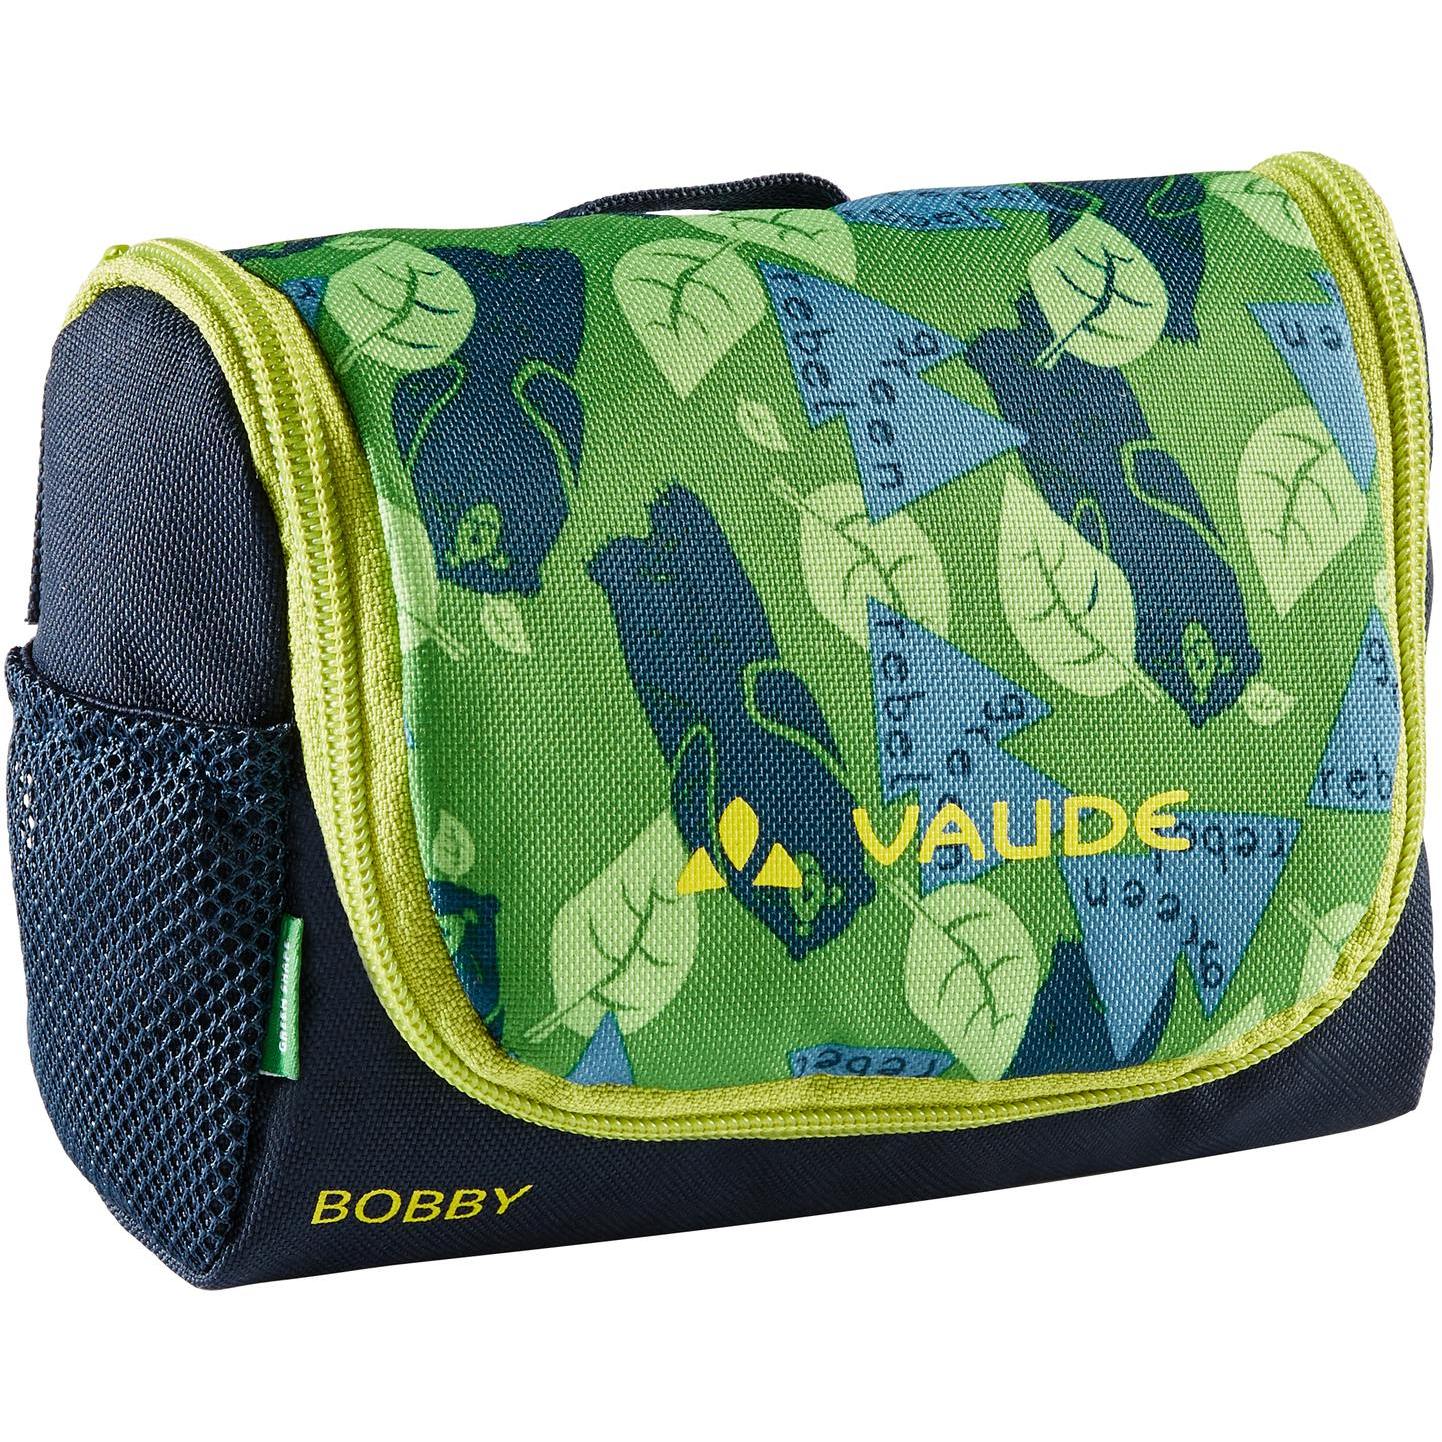 Picture of Vaude Bobby Washbag 1L Kids - parrot green/eclipse